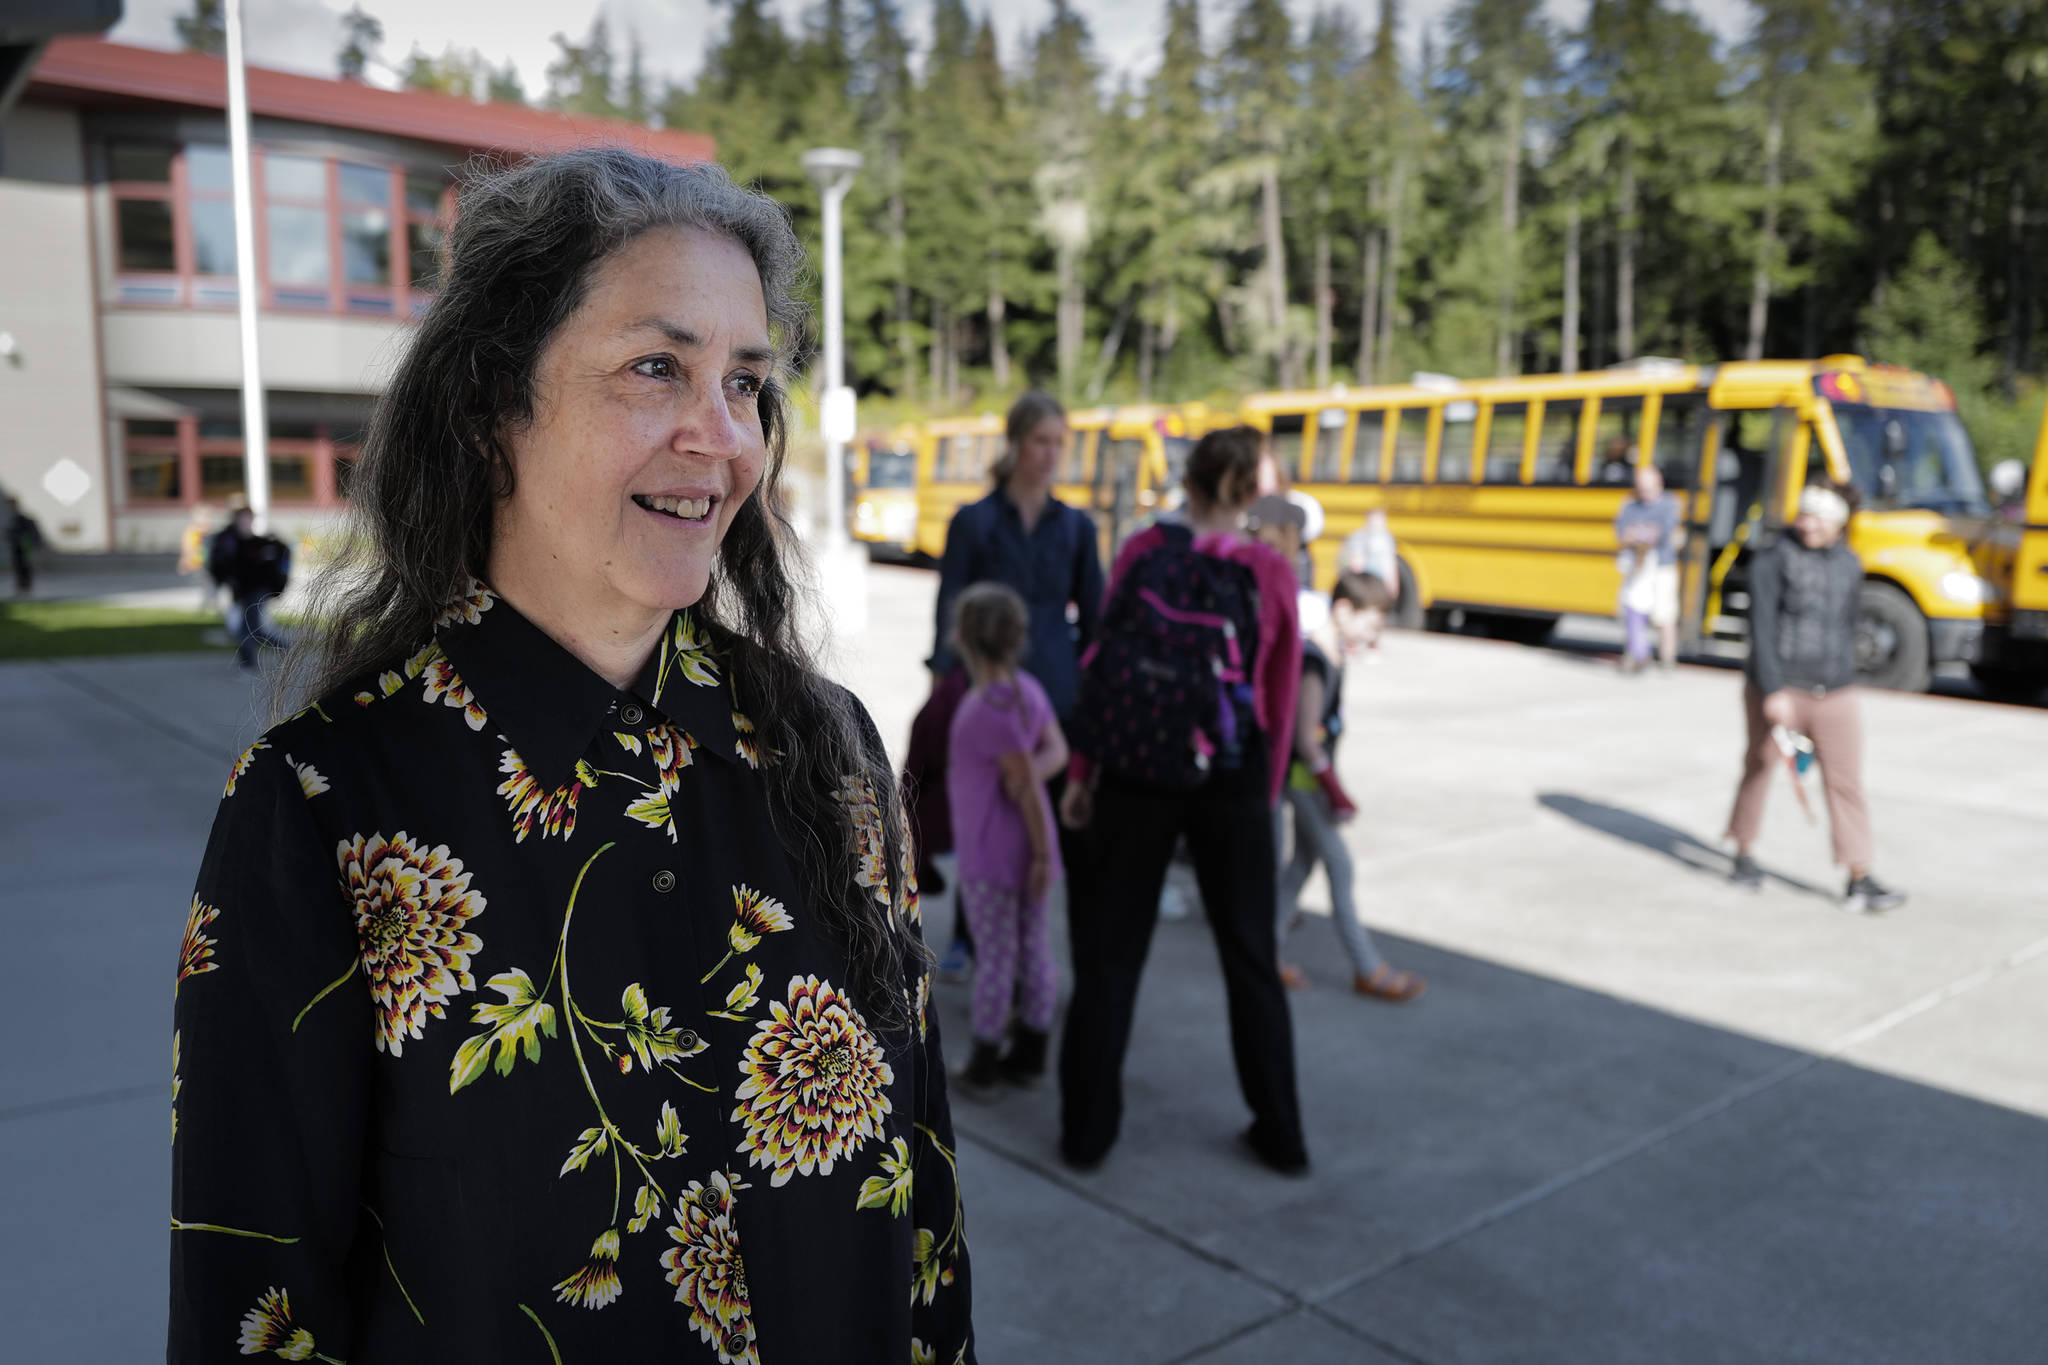 <strong> Michael Penn </strong>| Juneau Empire                                Pam Garcia, a longtime educator at Auke Bay Elementary School, watches as students catch their buses after school on Tuesday. Garcia was named as one of three finalists for Alaska Teacher of the Year.